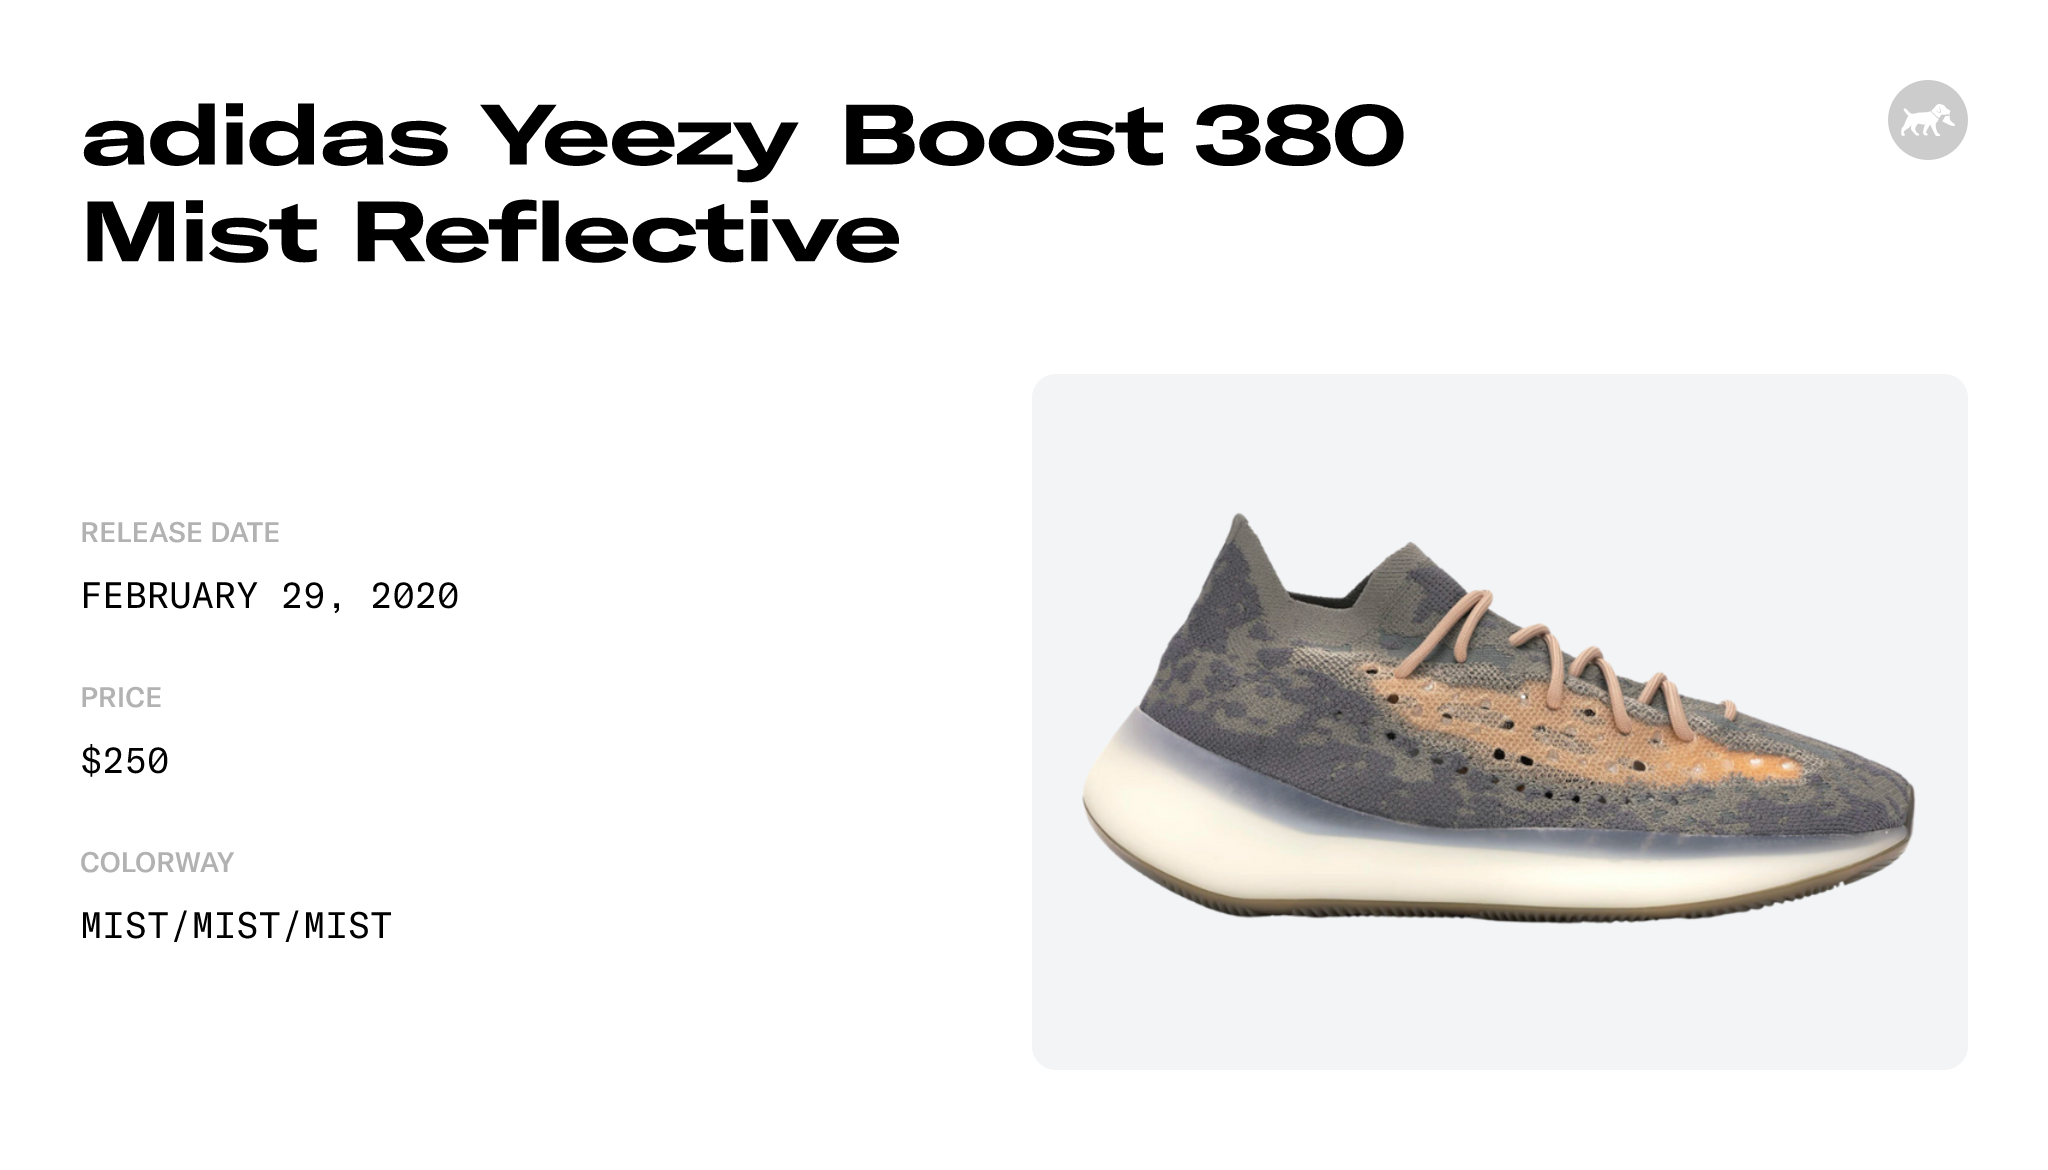 adidas Yeezy Boost 380 Mist Reflective - FX9846 Raffles and Release Date